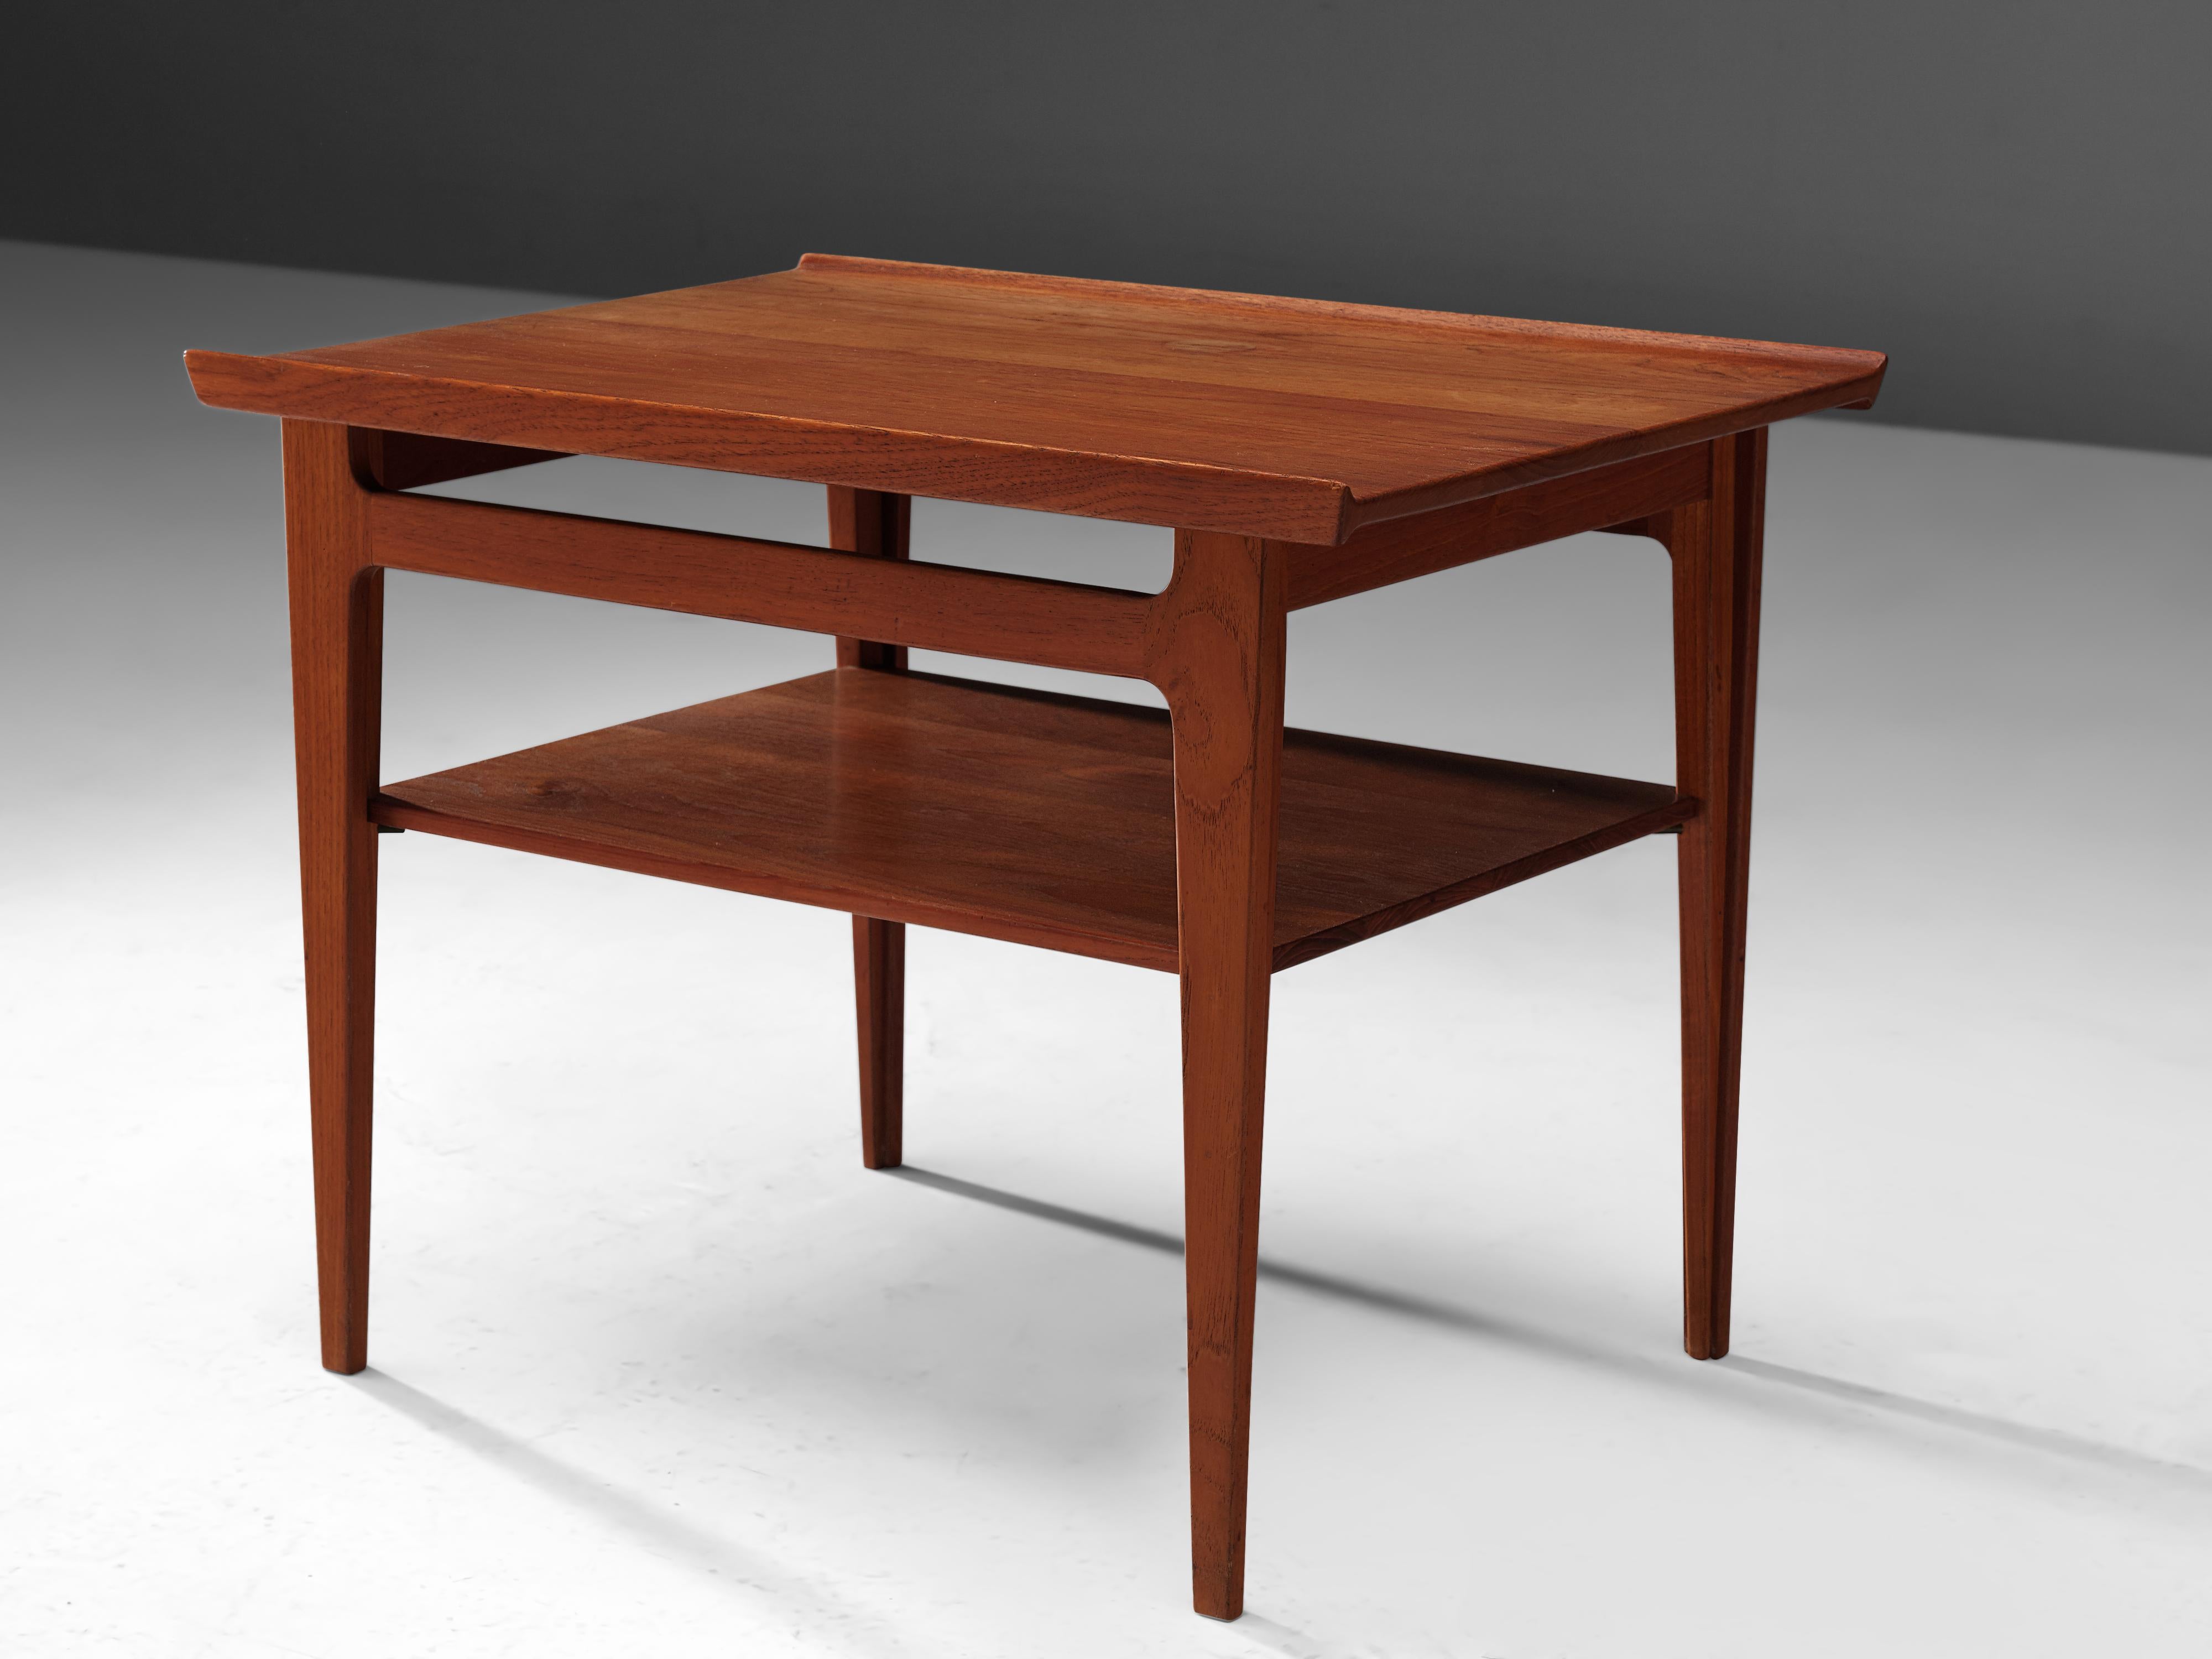 Finn Juhl for for France & Søn, coffee table from the series ‘500’, teak, Denmark, design 1958

This solid teak coffee table was part of the ‘500’ series that included a square and a rectangular side table with the common feature of a raised lip